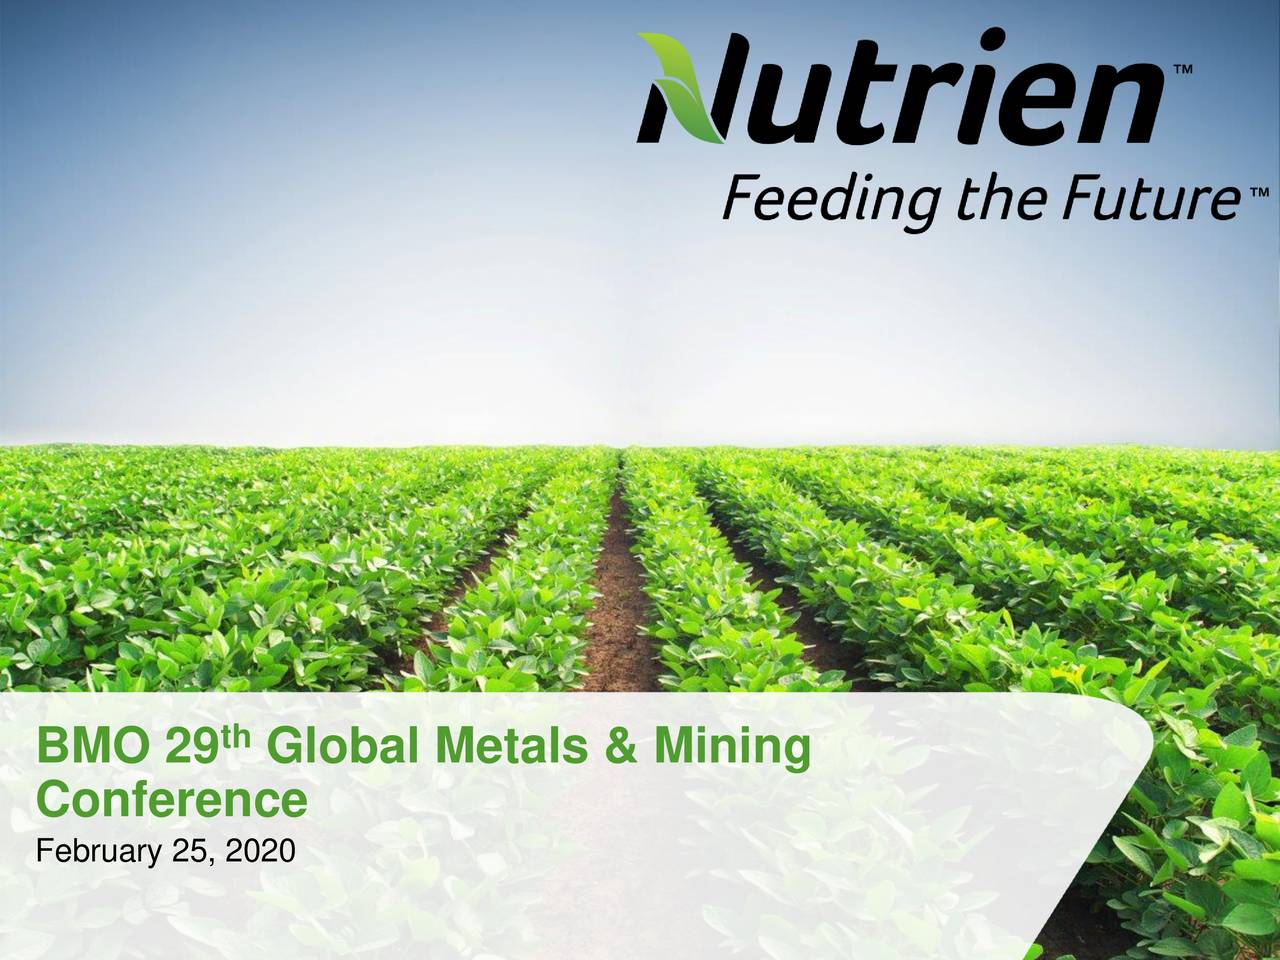 Nutrien (NTR) Presents At BMO 29th Global Metals & Mining Conference